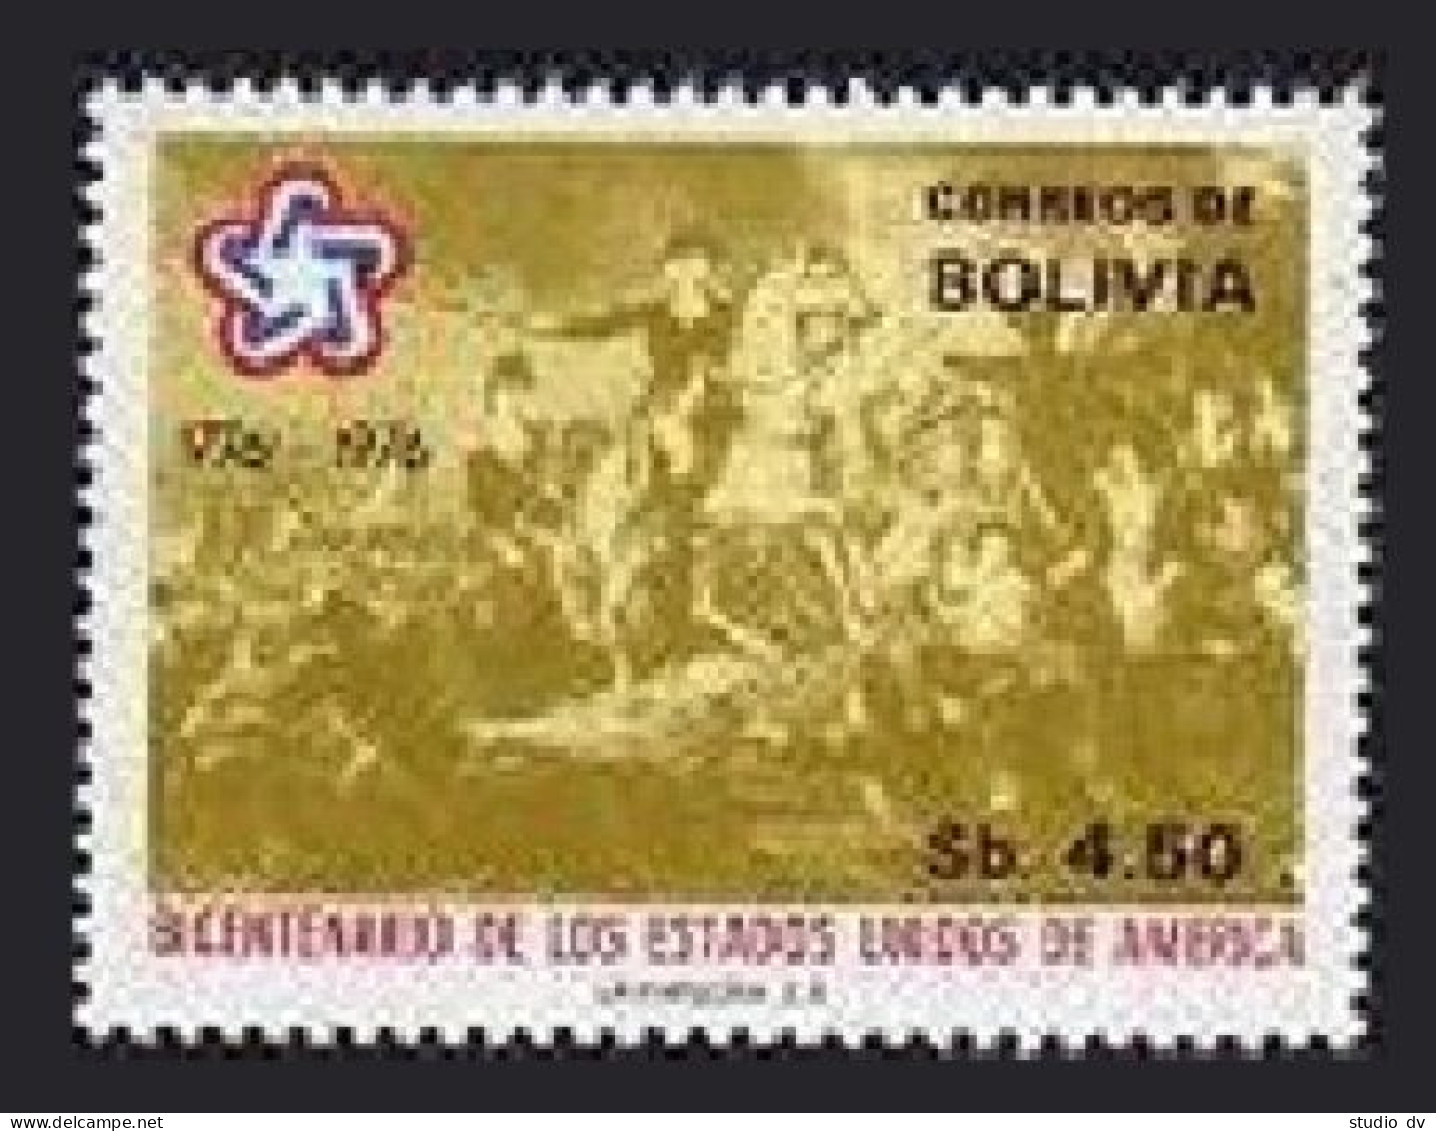 Bolivia 583, 583a, Hinged. Mi 911, Bl.66. USA-200, 1976. Battle Action, Flags. - Bolivien